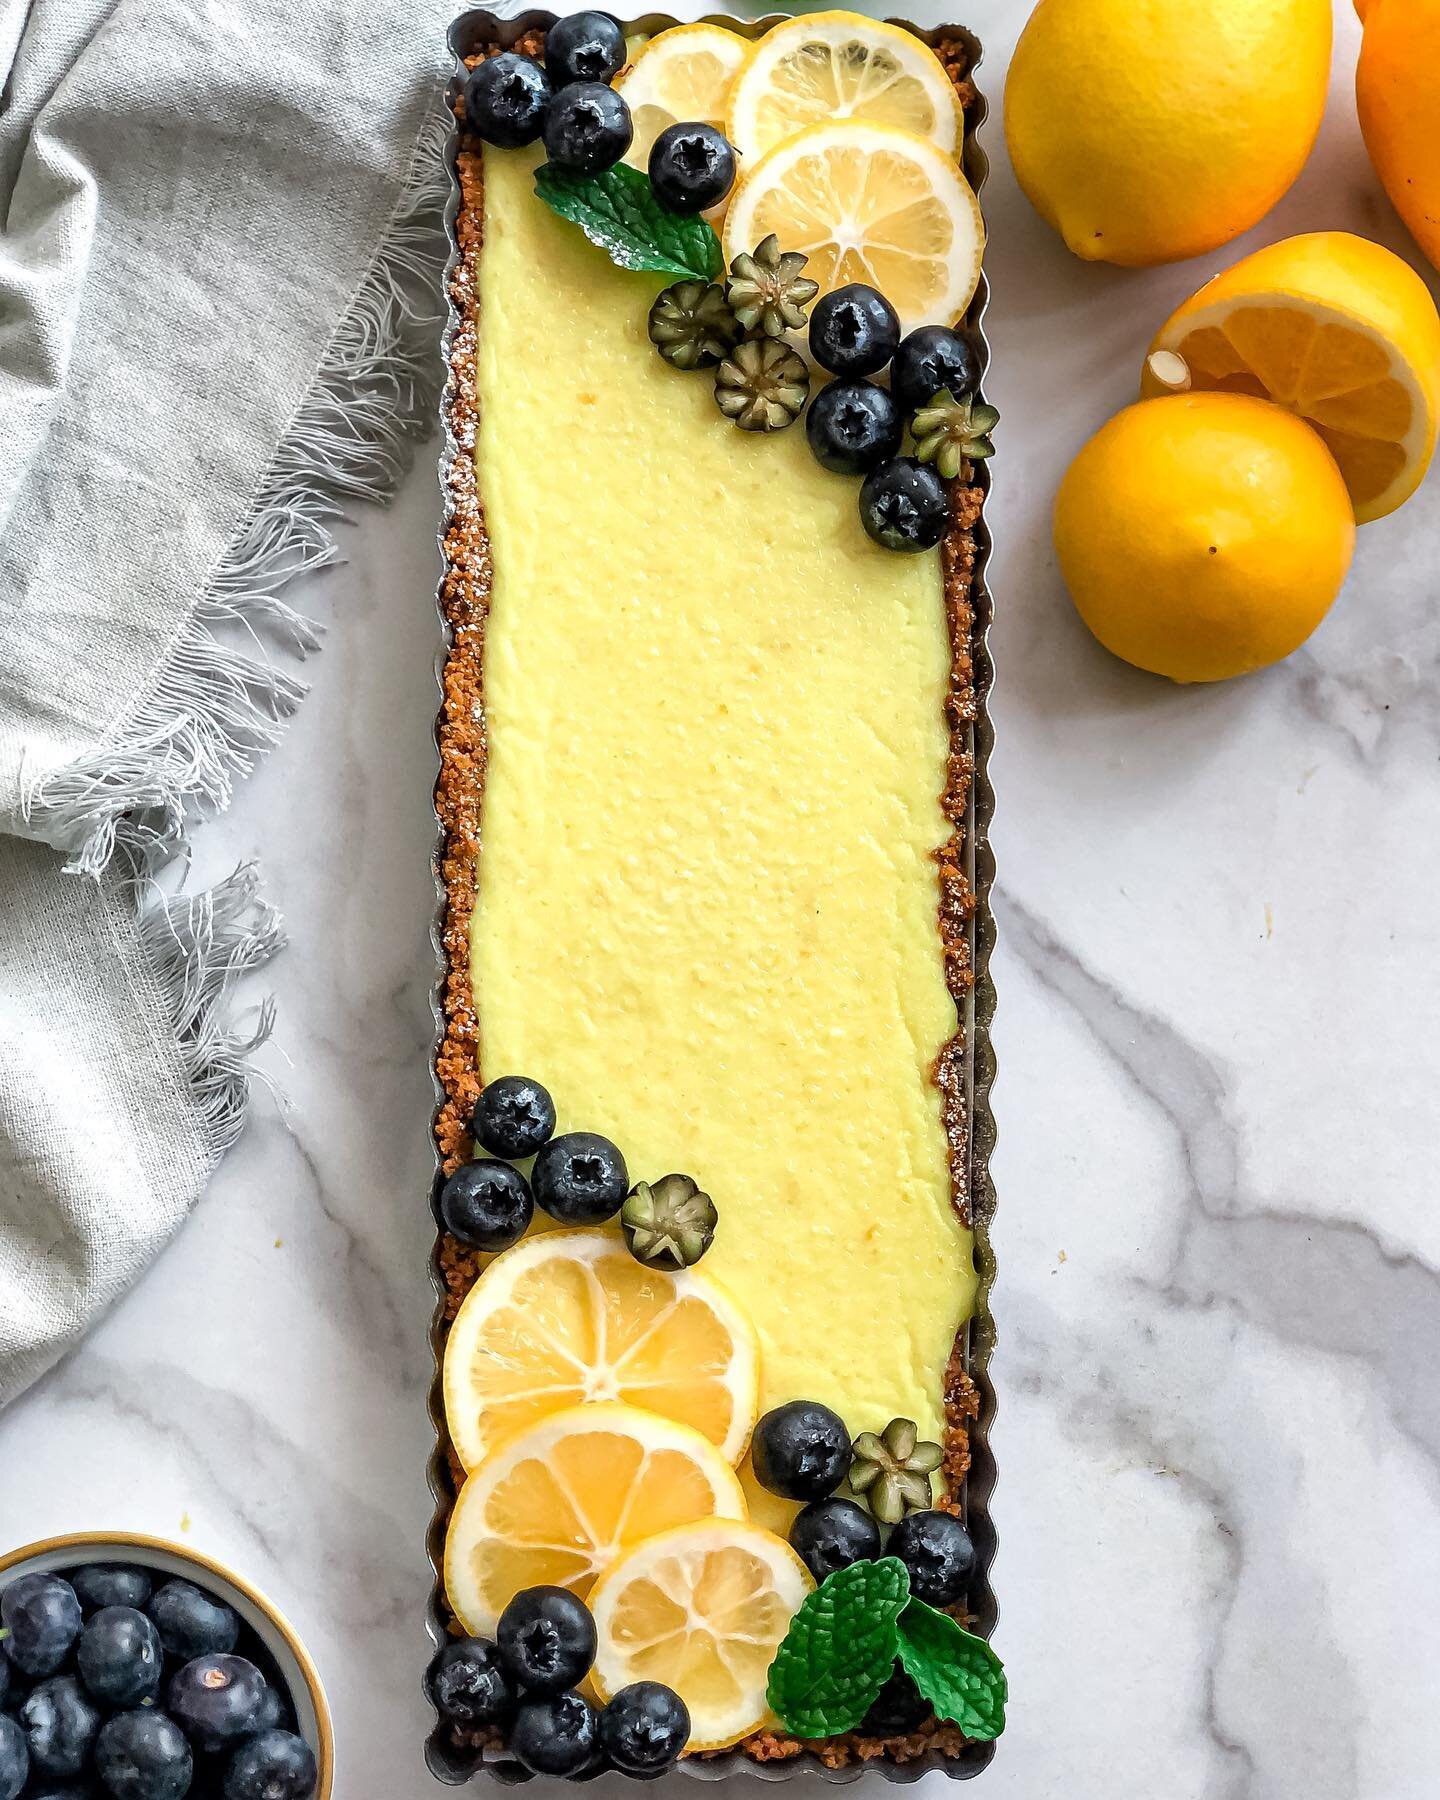 Same Lemon Tart Recipe but different styling methods and shape. 🍋
Which one is your favorite? 1, 2 or 3? 
Perfect dessert for #mothersday this weekend.  No baking required. 
This recipe is one of the most popular recipes here on IG and my blog. Here